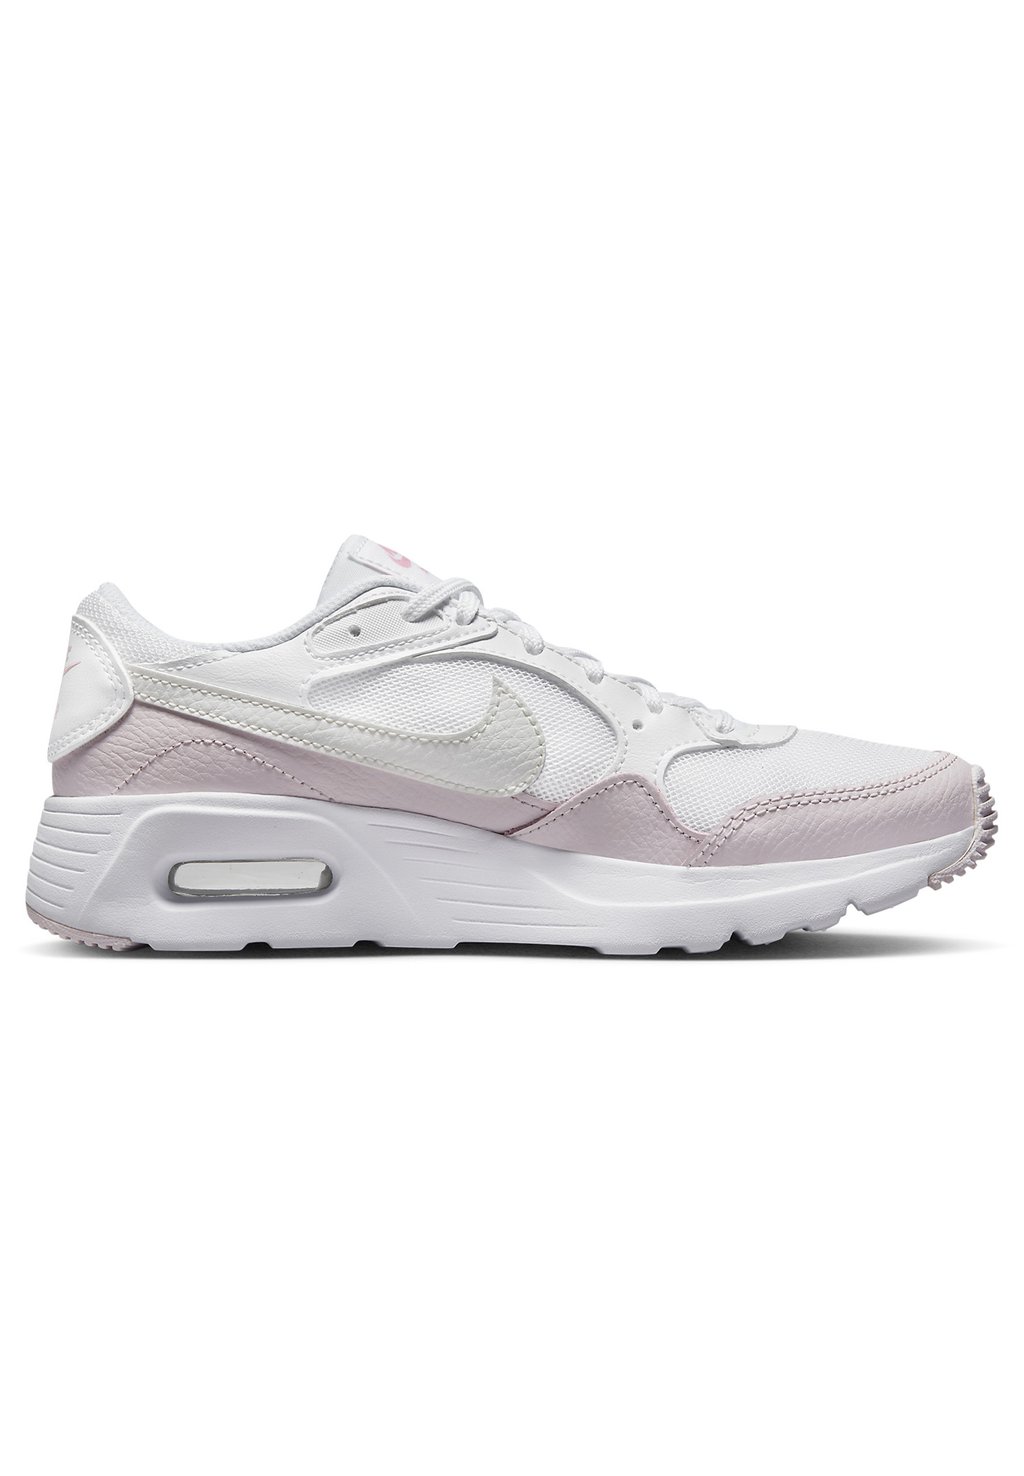 Низкие кроссовки Nike Air Max Sc (Gs) Nike, цвет white/summit white-pearl pink-med soft pink фен marta mt 1437 white pearl